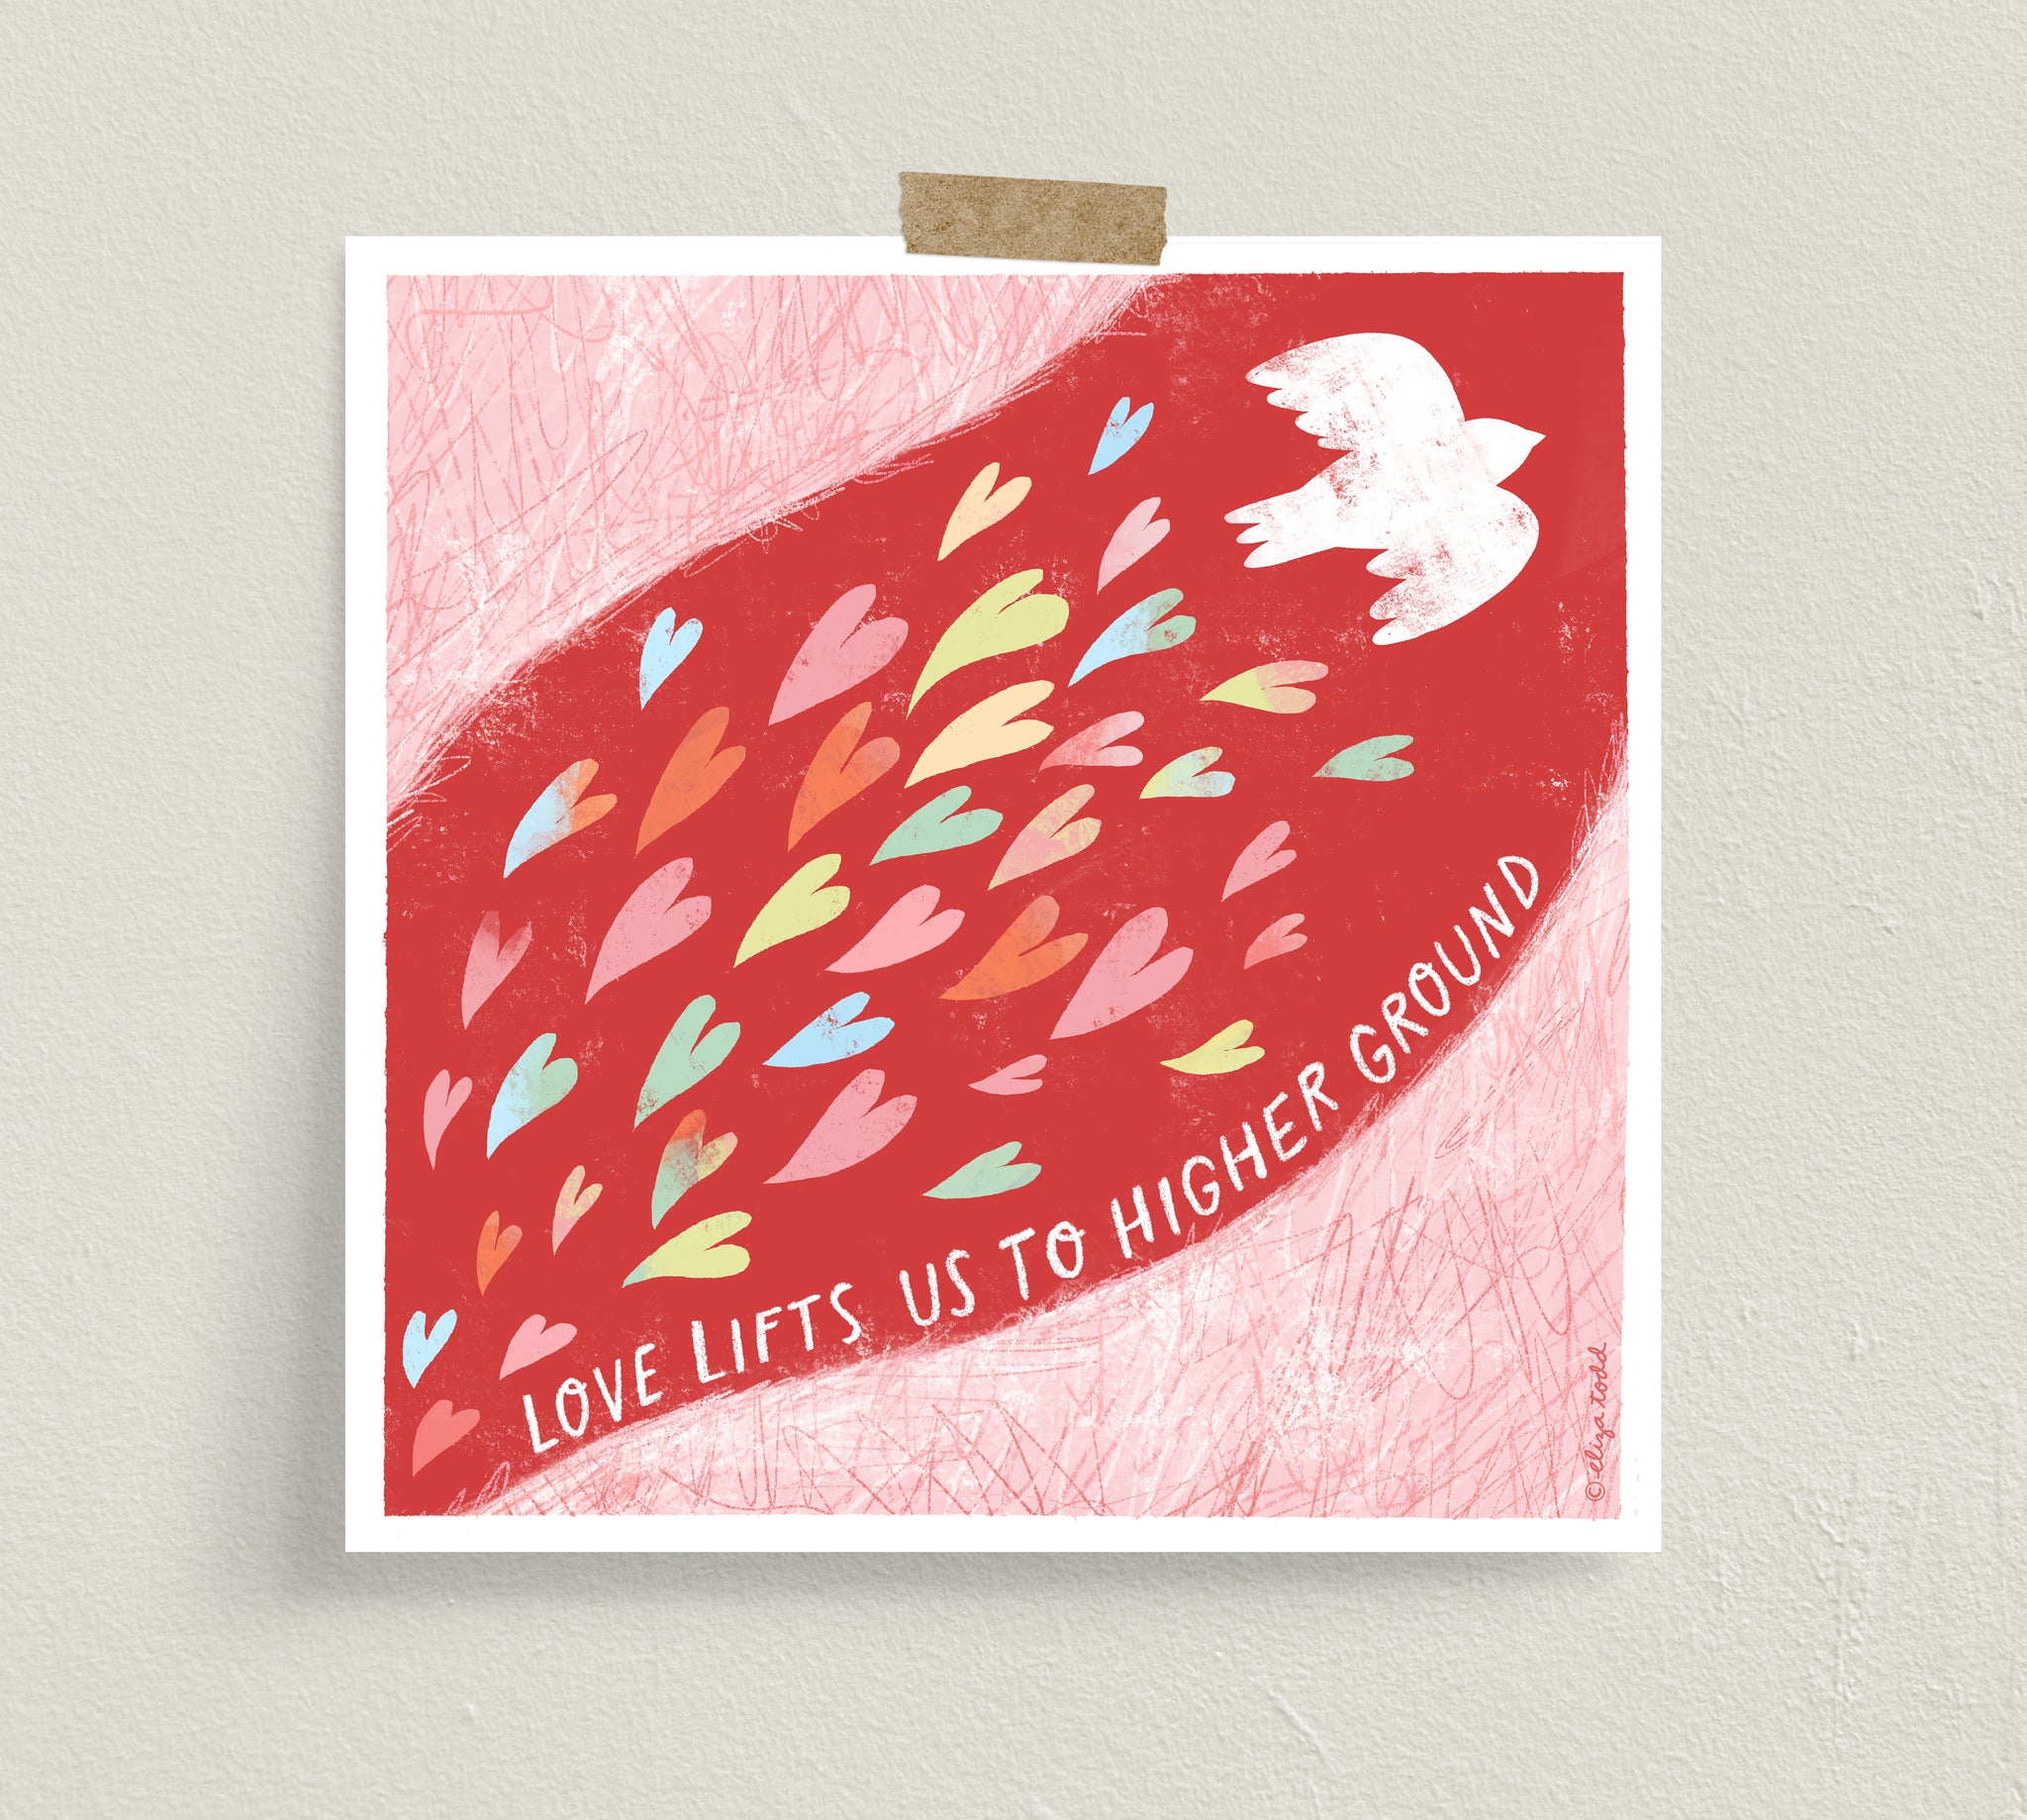 Fine art prints by Eliza Todd featuring hearts and a bird saying "Love lifts us to higher ground." - APeaceofWerk.com